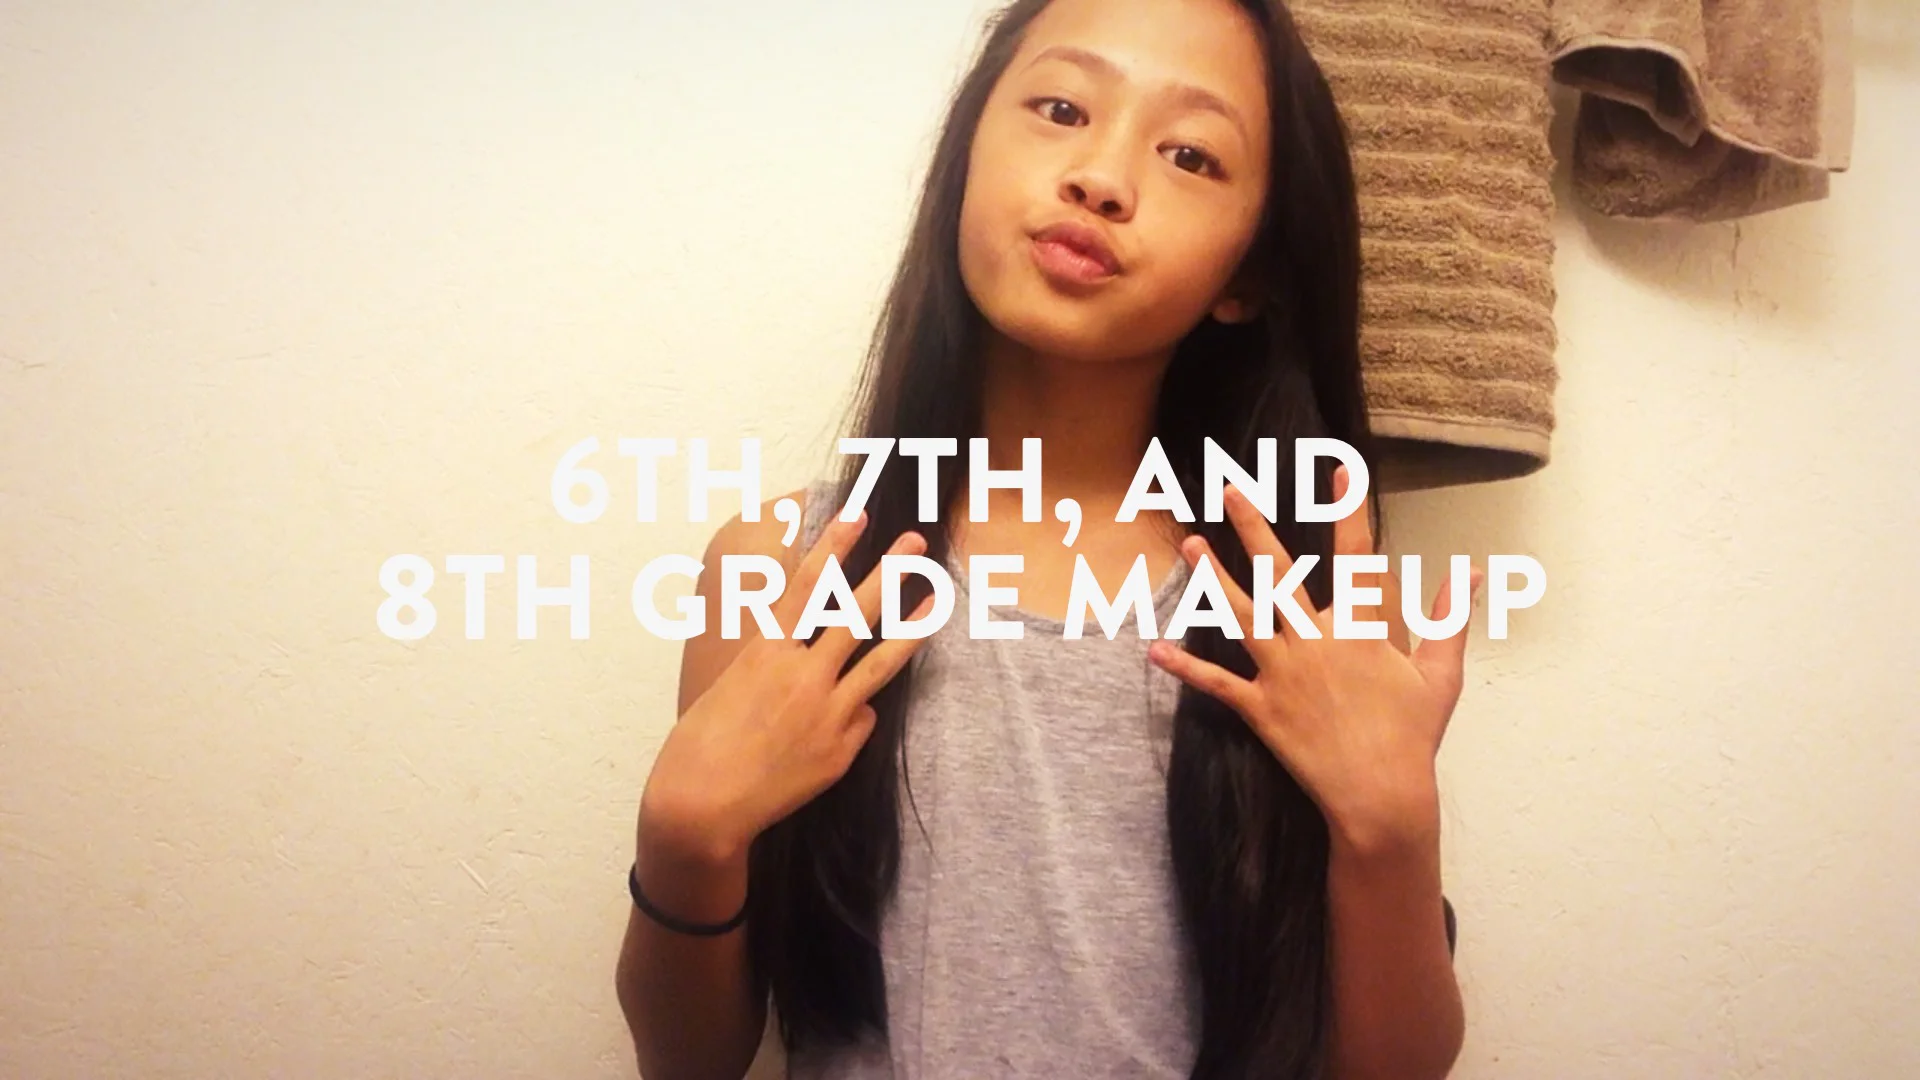 6th 7th And 8th Grade Makeup On Vimeo